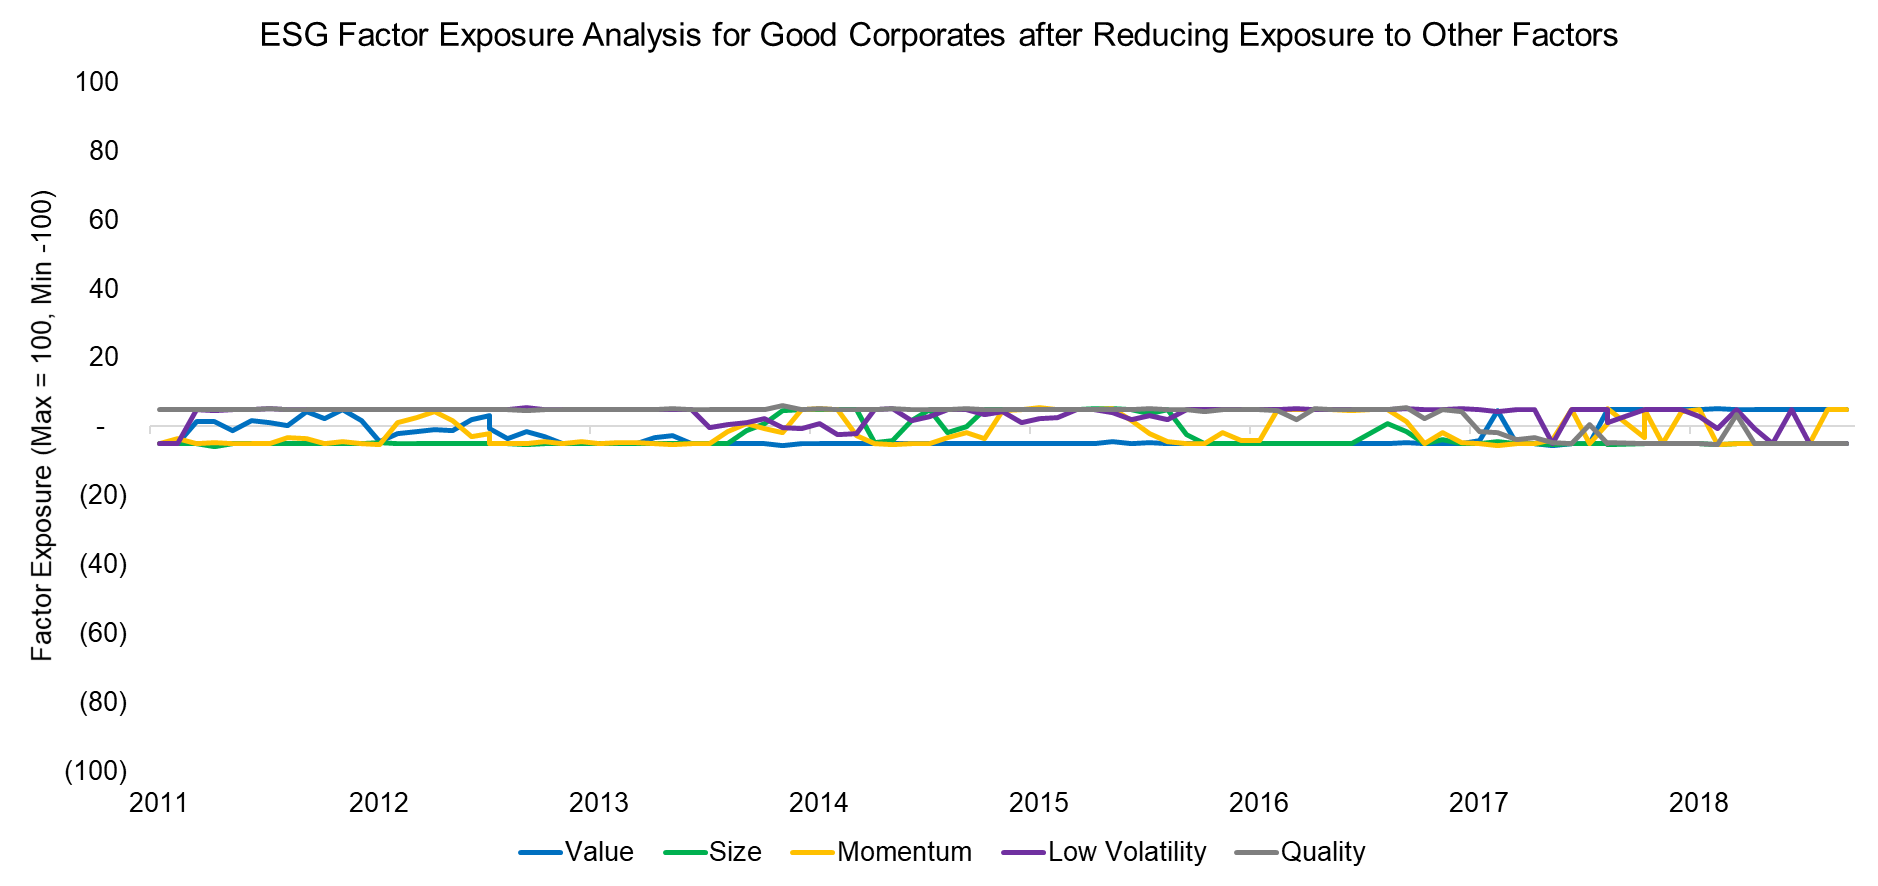 ESG Factor Exposure Analysis for Good Corporates after Reducing Exposure to Other Factors